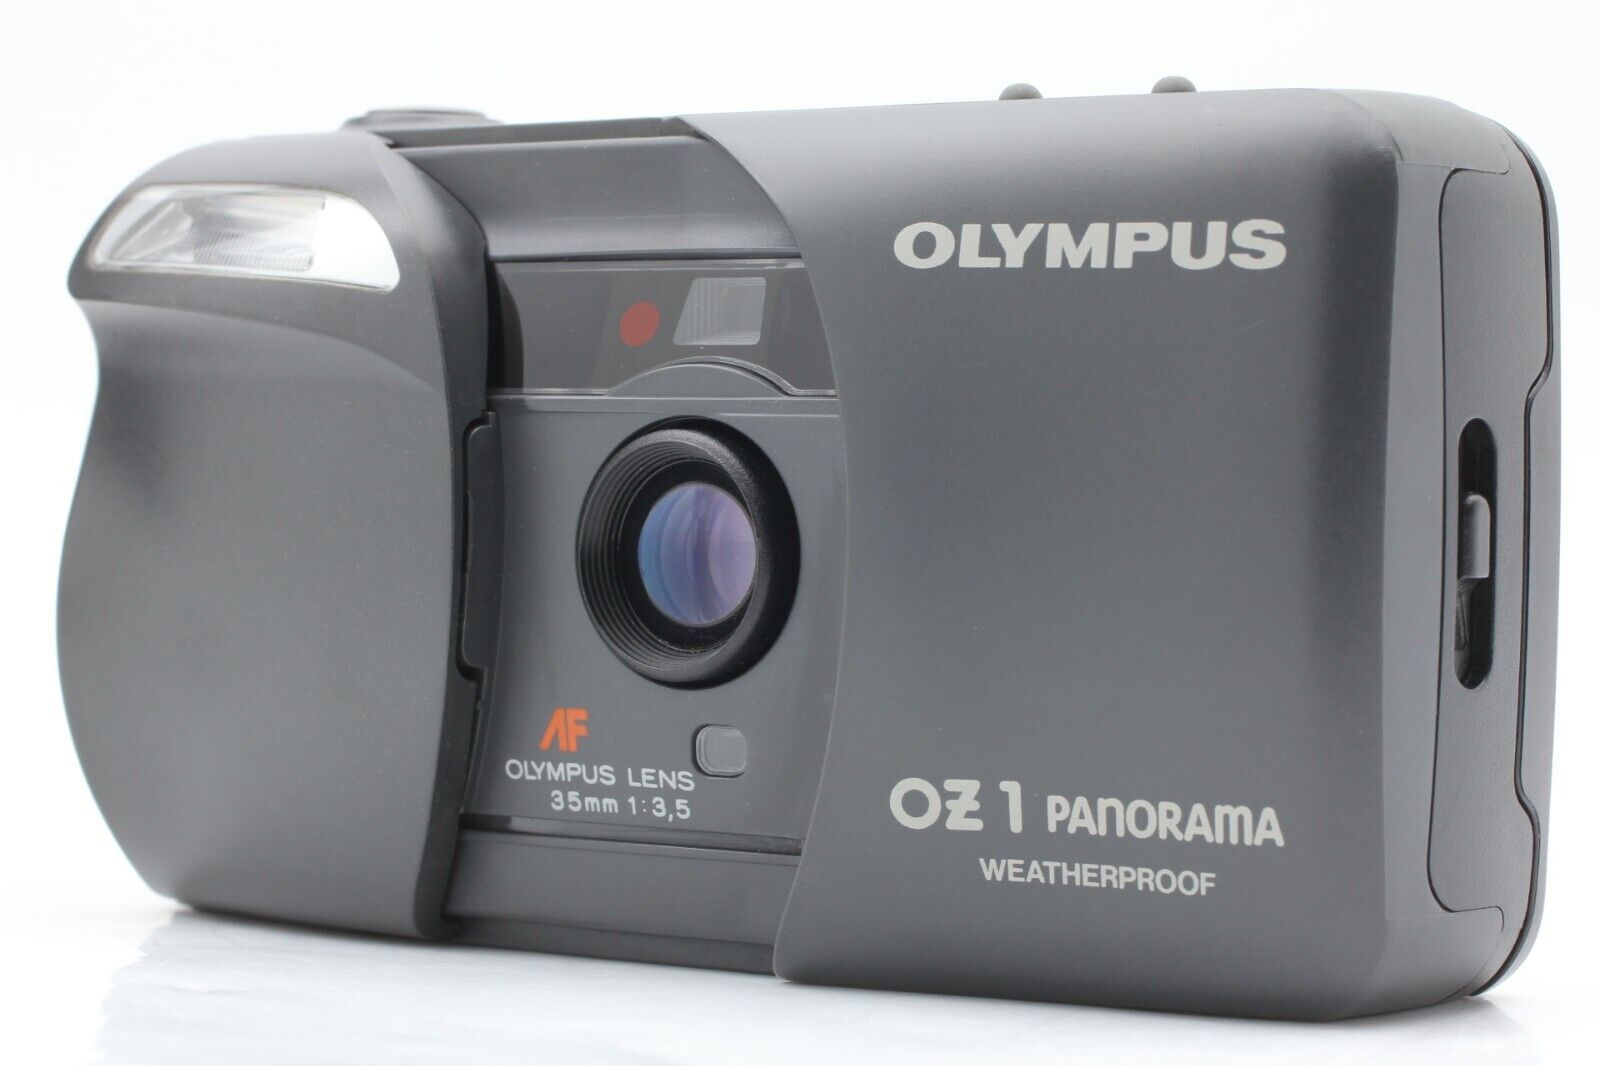 Olympus OZ1 Panorama 35mm AF Point & Shoot Filmを5,400円でお買取りしました。